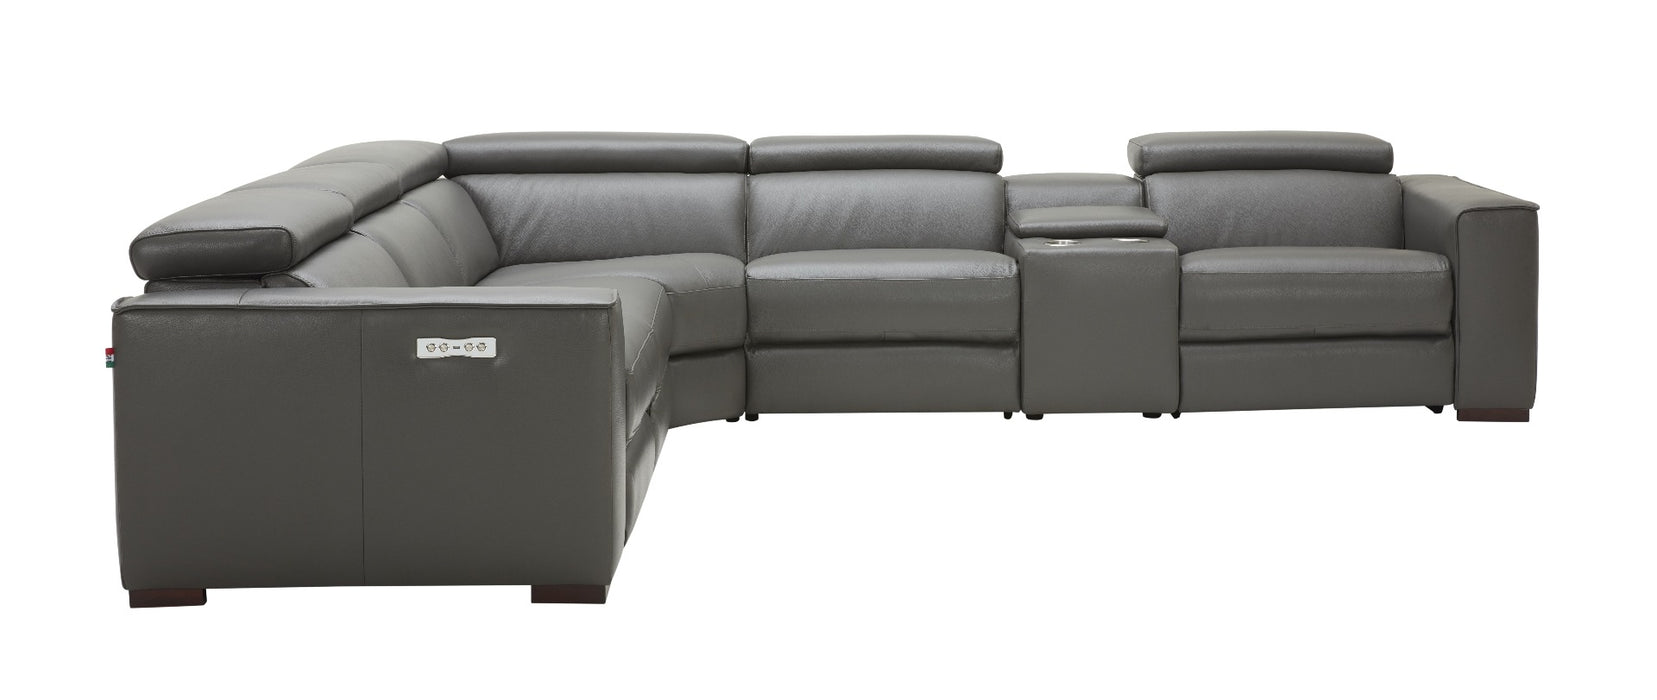 J&M Furniture - Picasso Motion Sectional in Dark Grey - 18865-DG